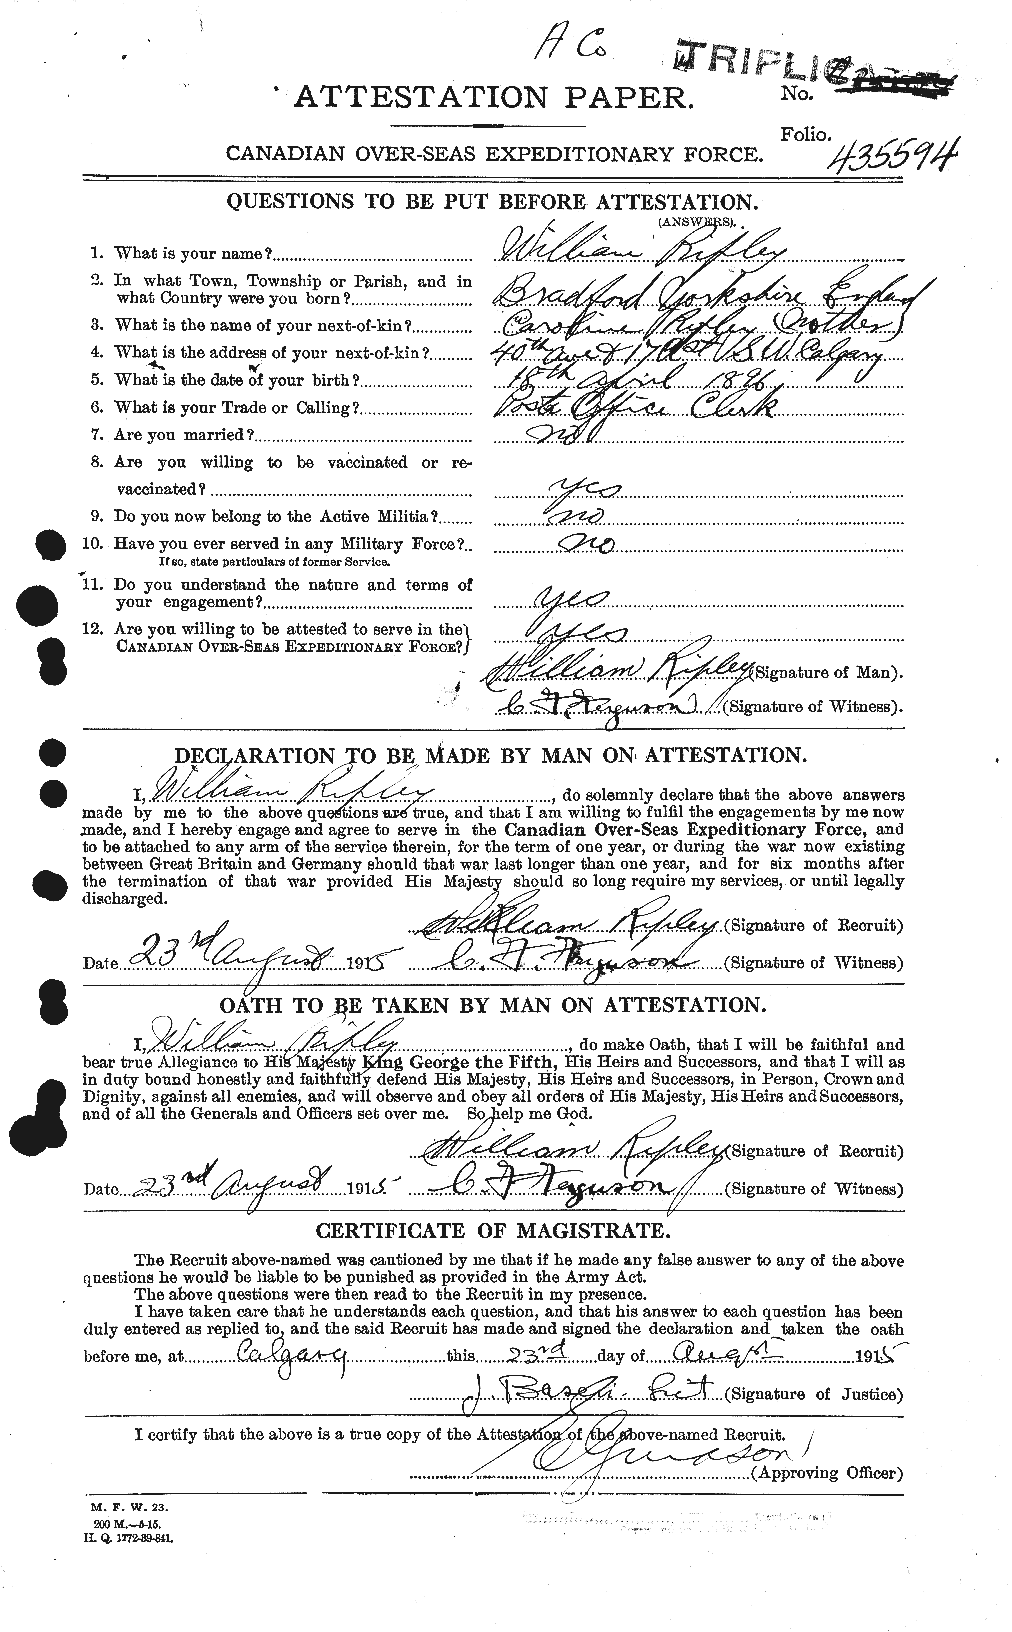 Personnel Records of the First World War - CEF 603381a